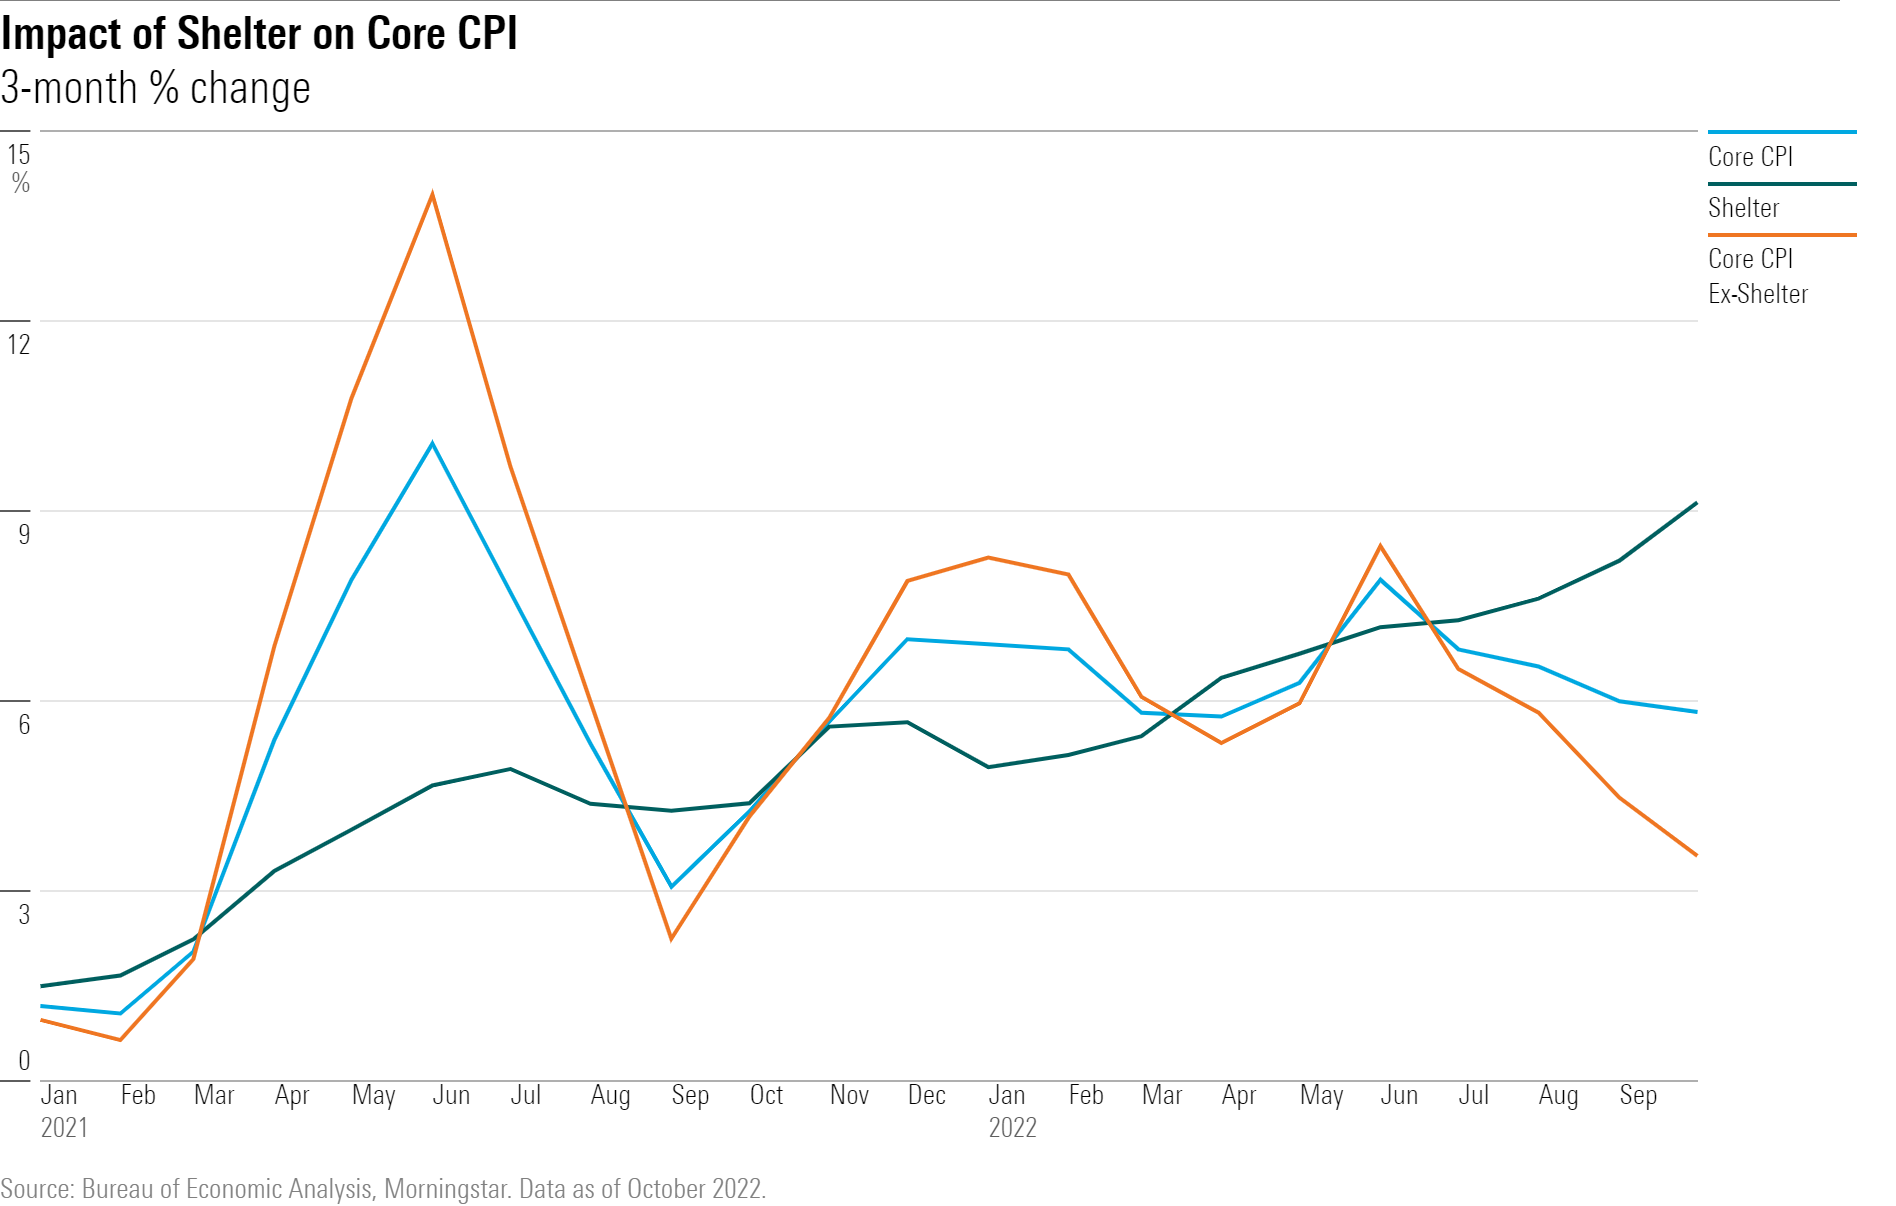 3-month % change in  core cpi vs. shelter and core cpi ex-shelter.